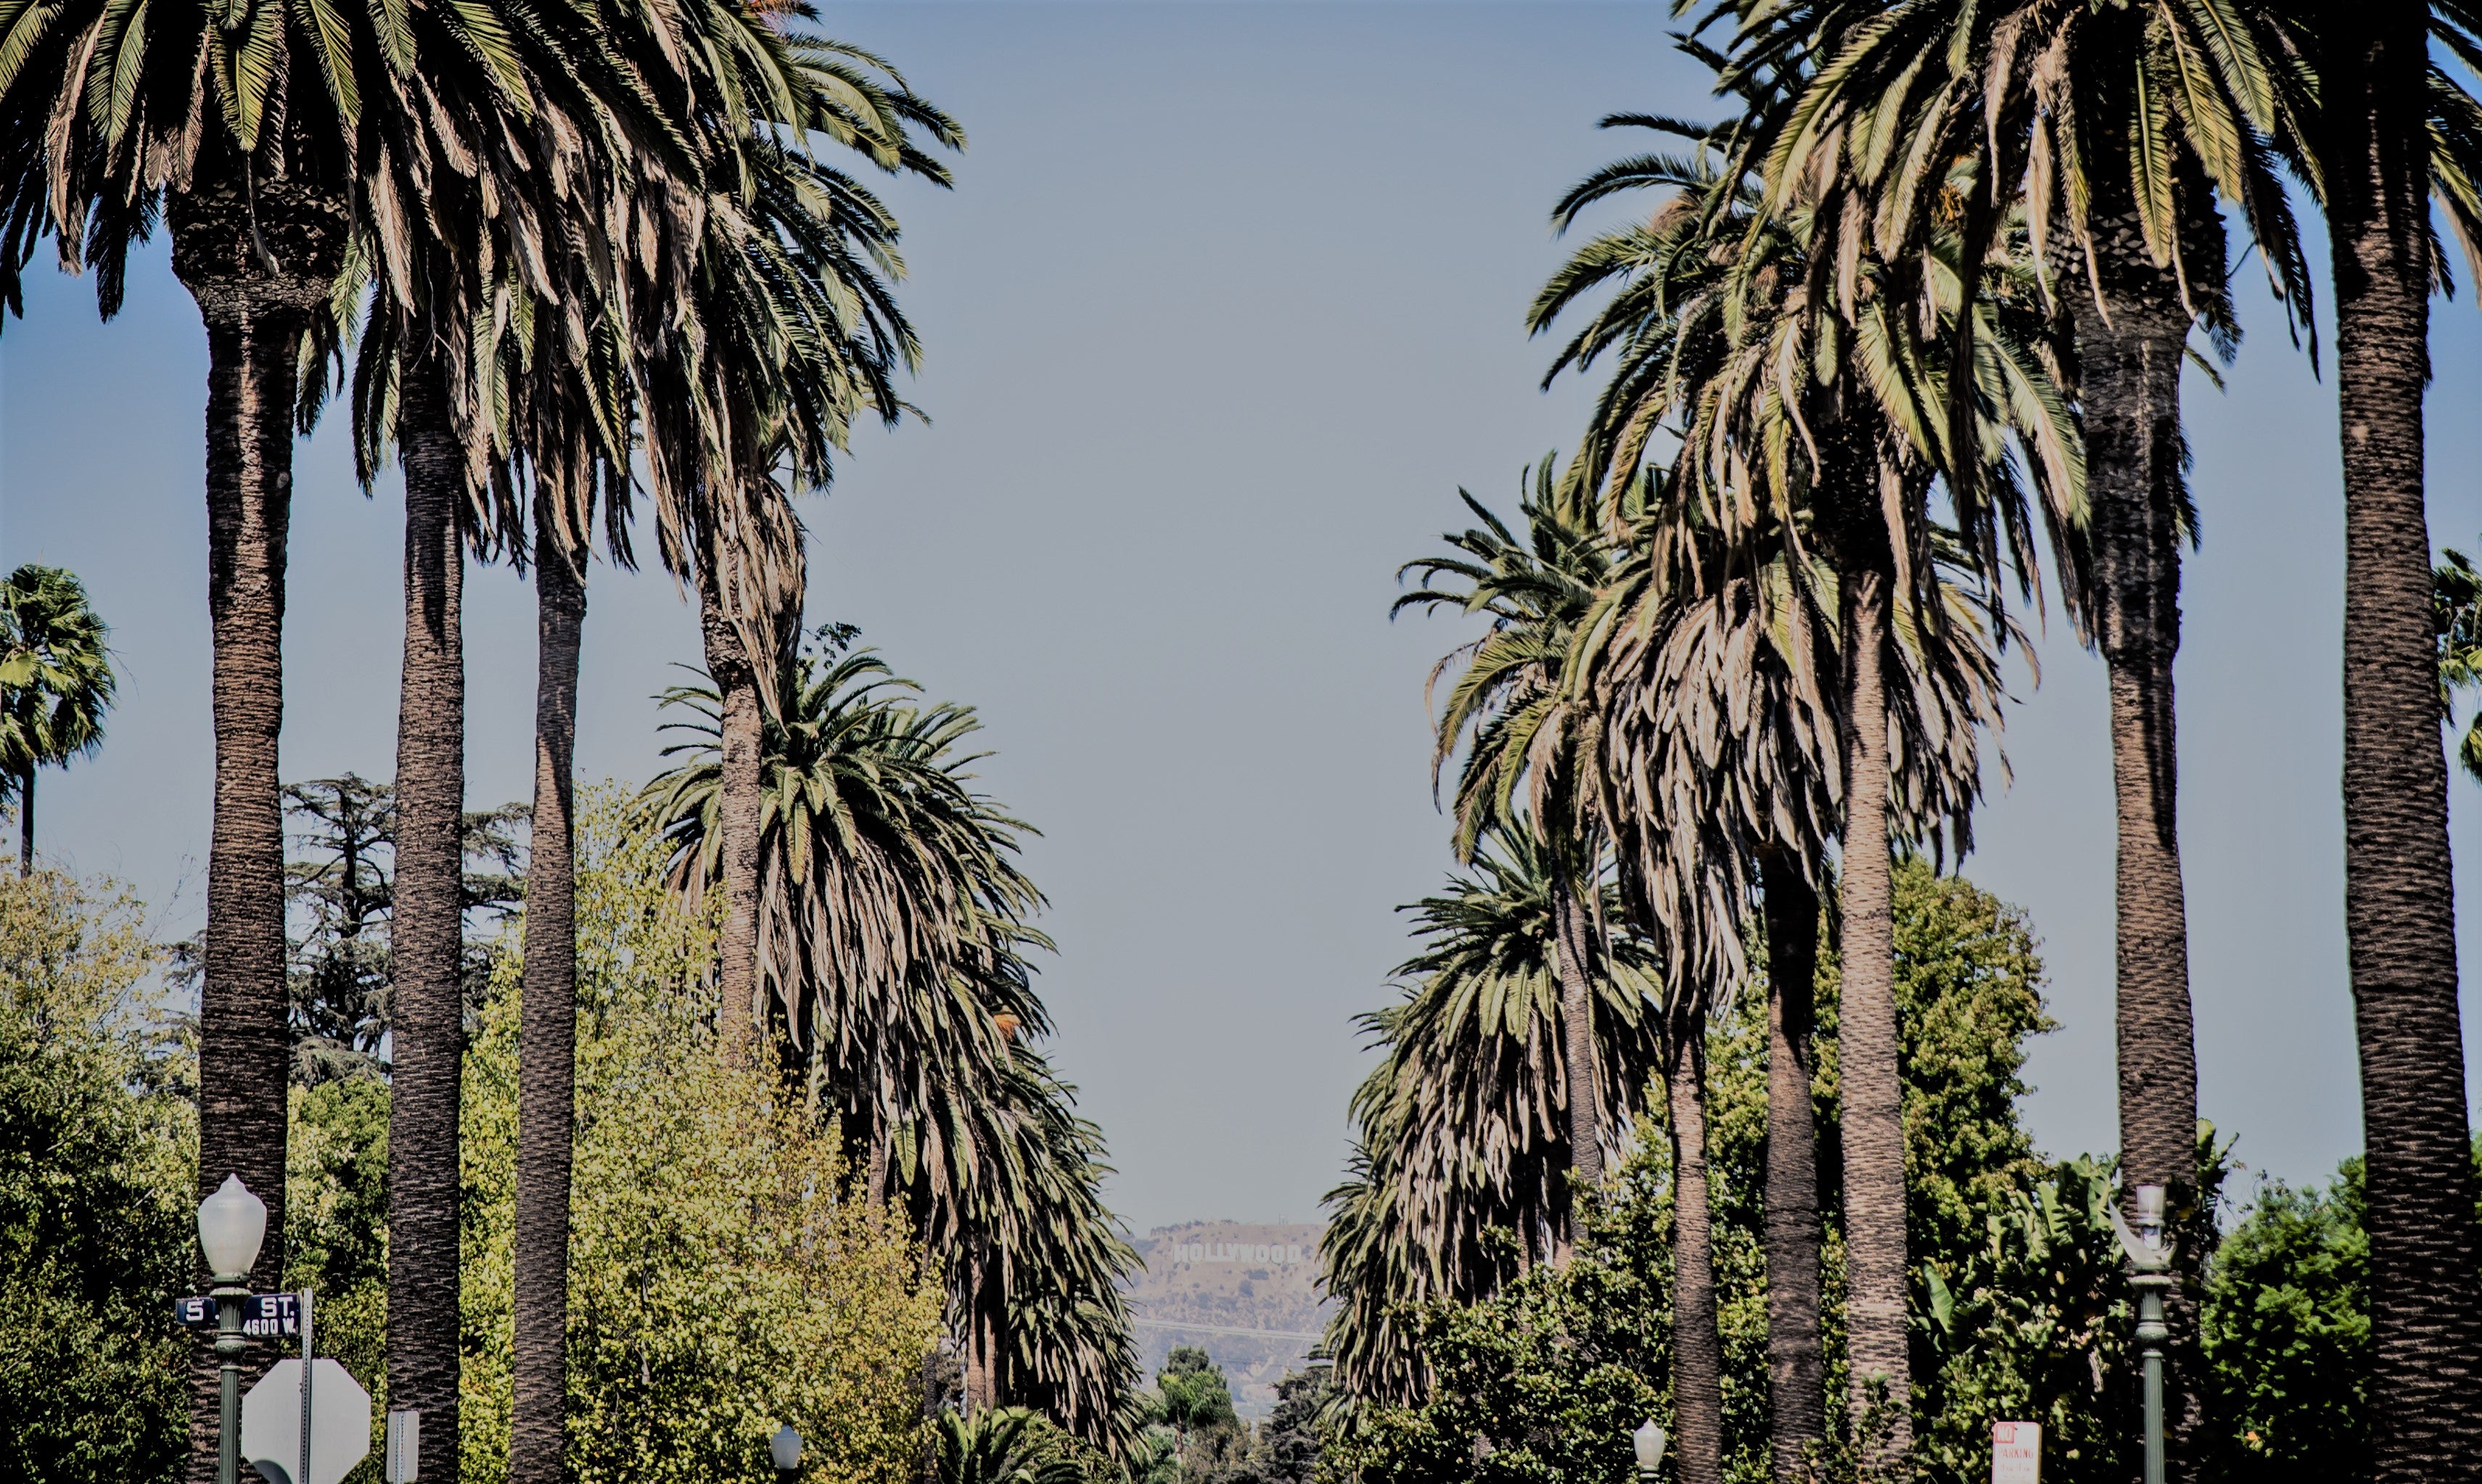 Palm trees in beverly hills, California, USA